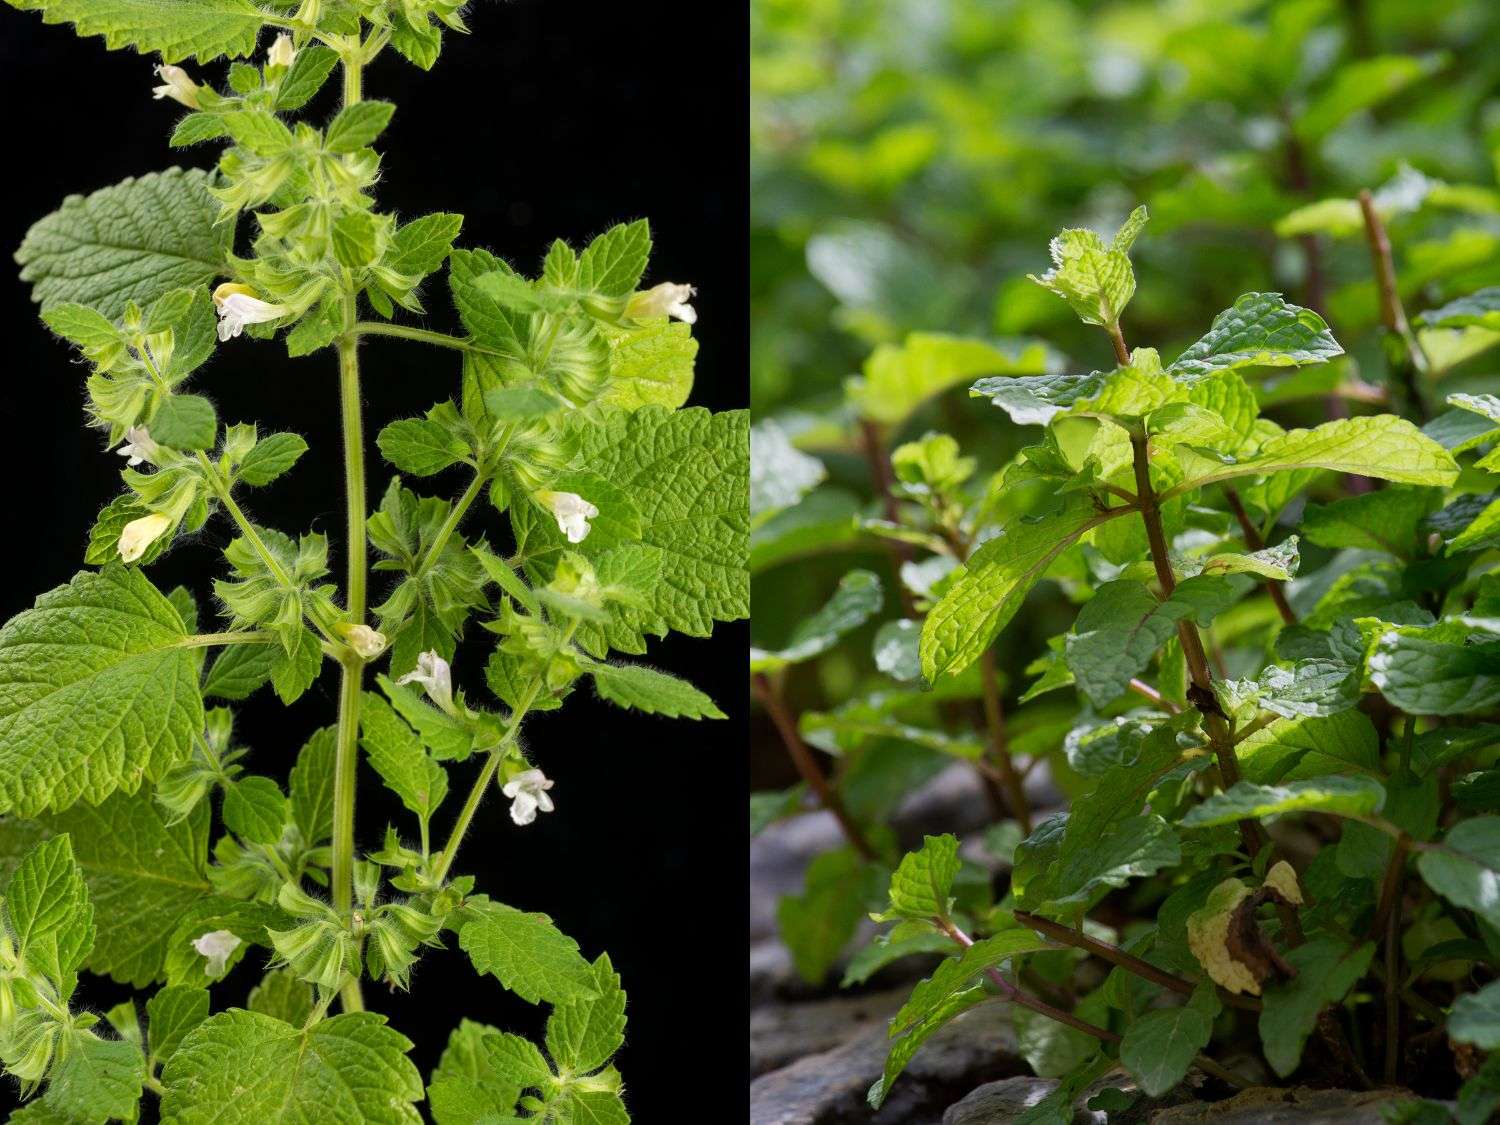 Side by side photo showing the physical differences between lemon balm vs mint